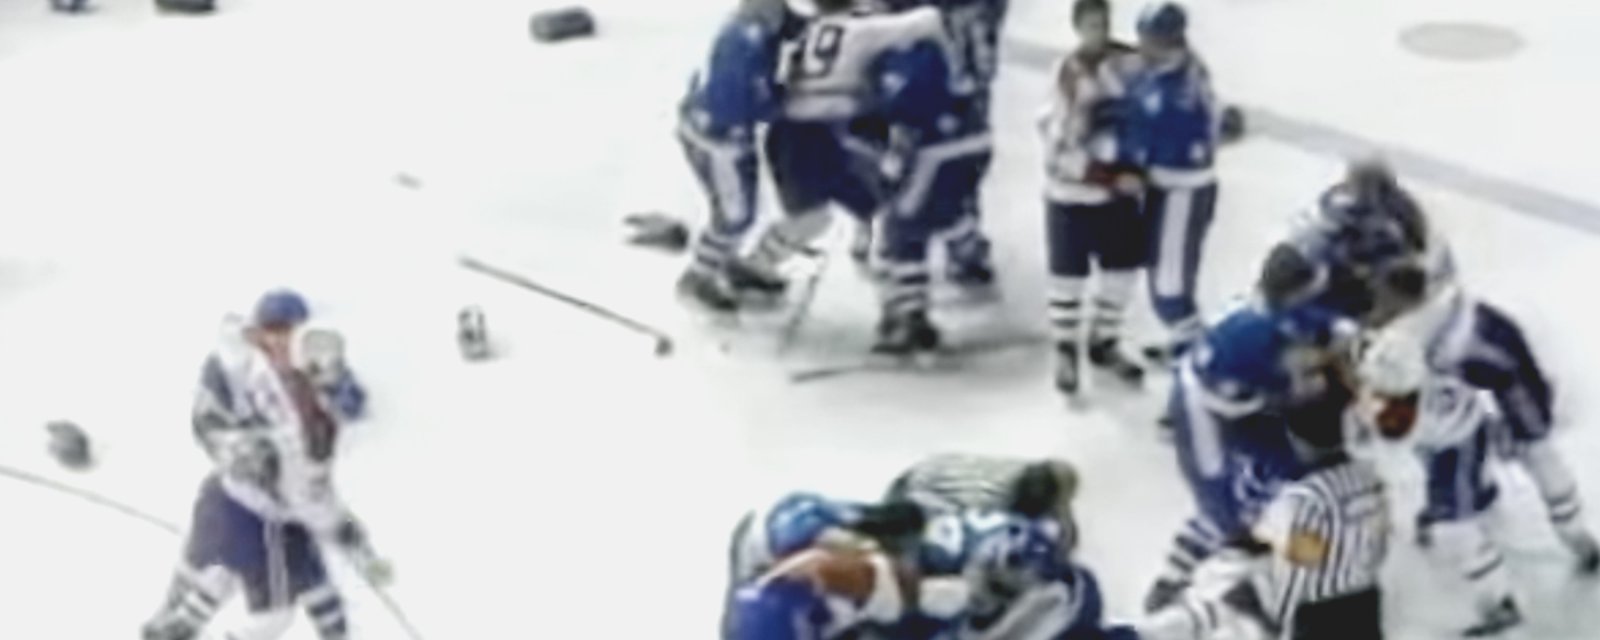 Watch: The most VIOLENT Hockey Brawl Ever Happened 33 Years Ago on Good Friday,